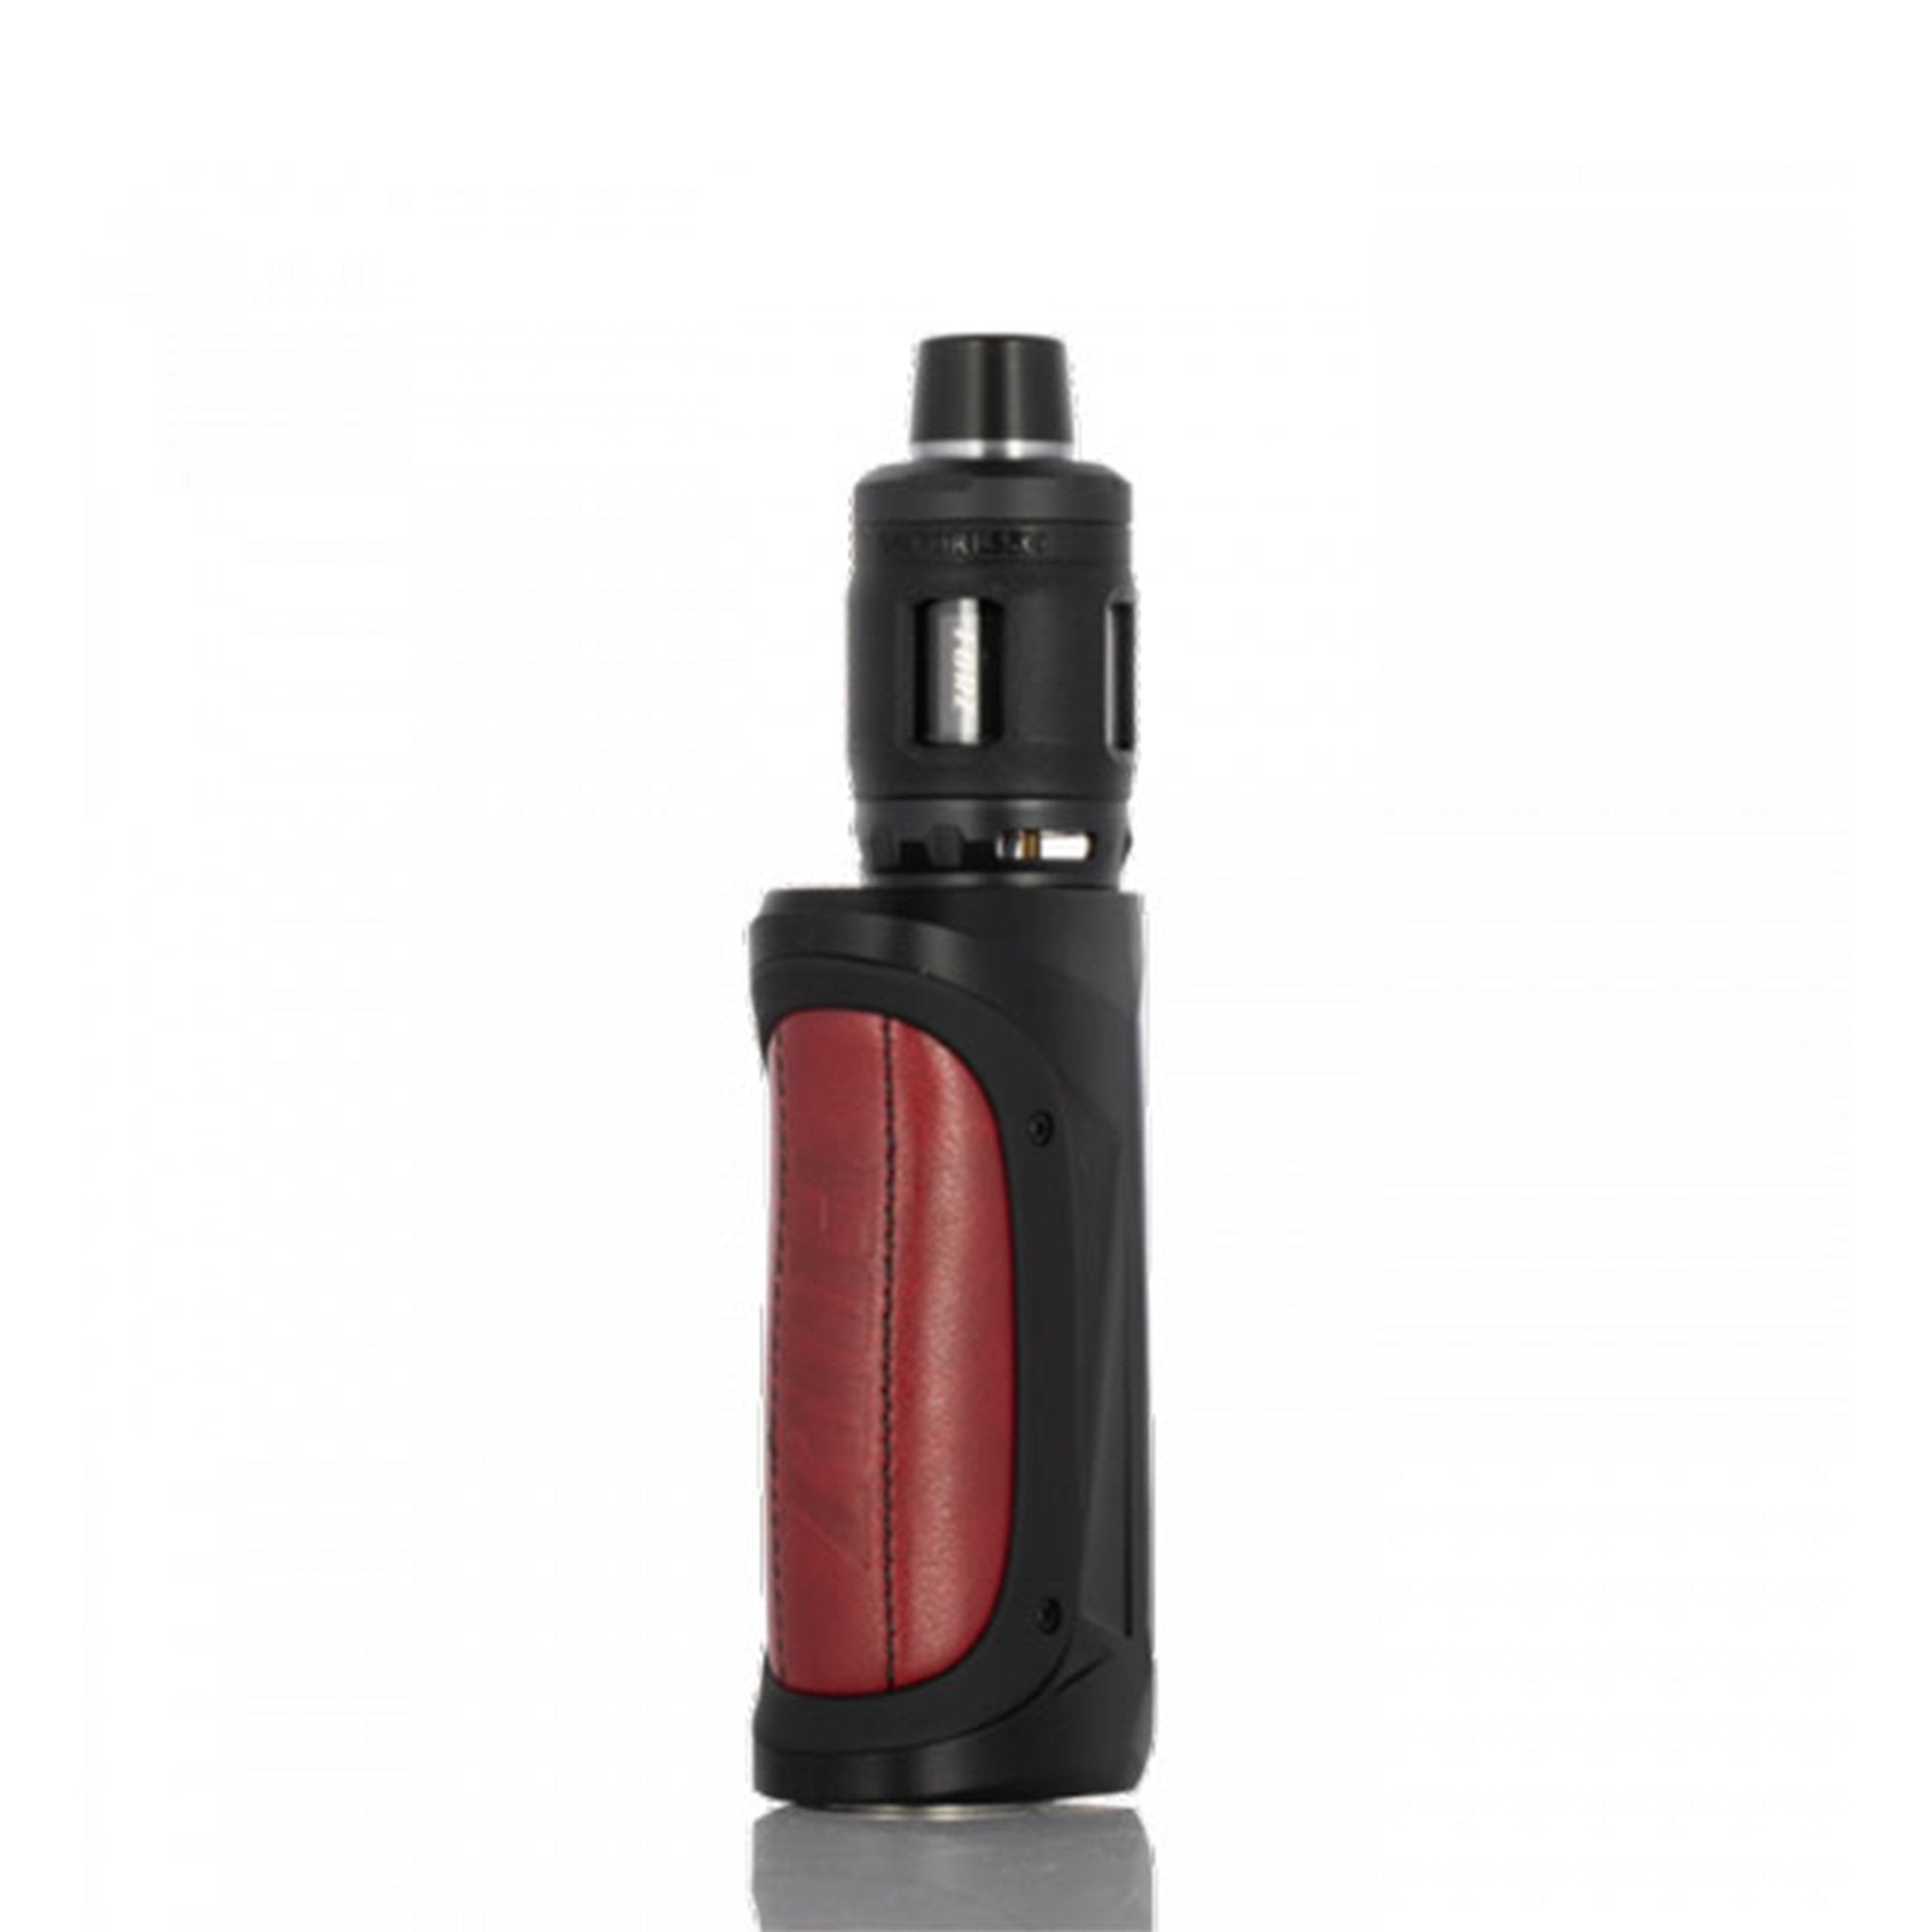 Vaporesso FORZ TX80 Kit | 80W | Wolfvapes - Wolfvapes.co.uk-Imperial Red